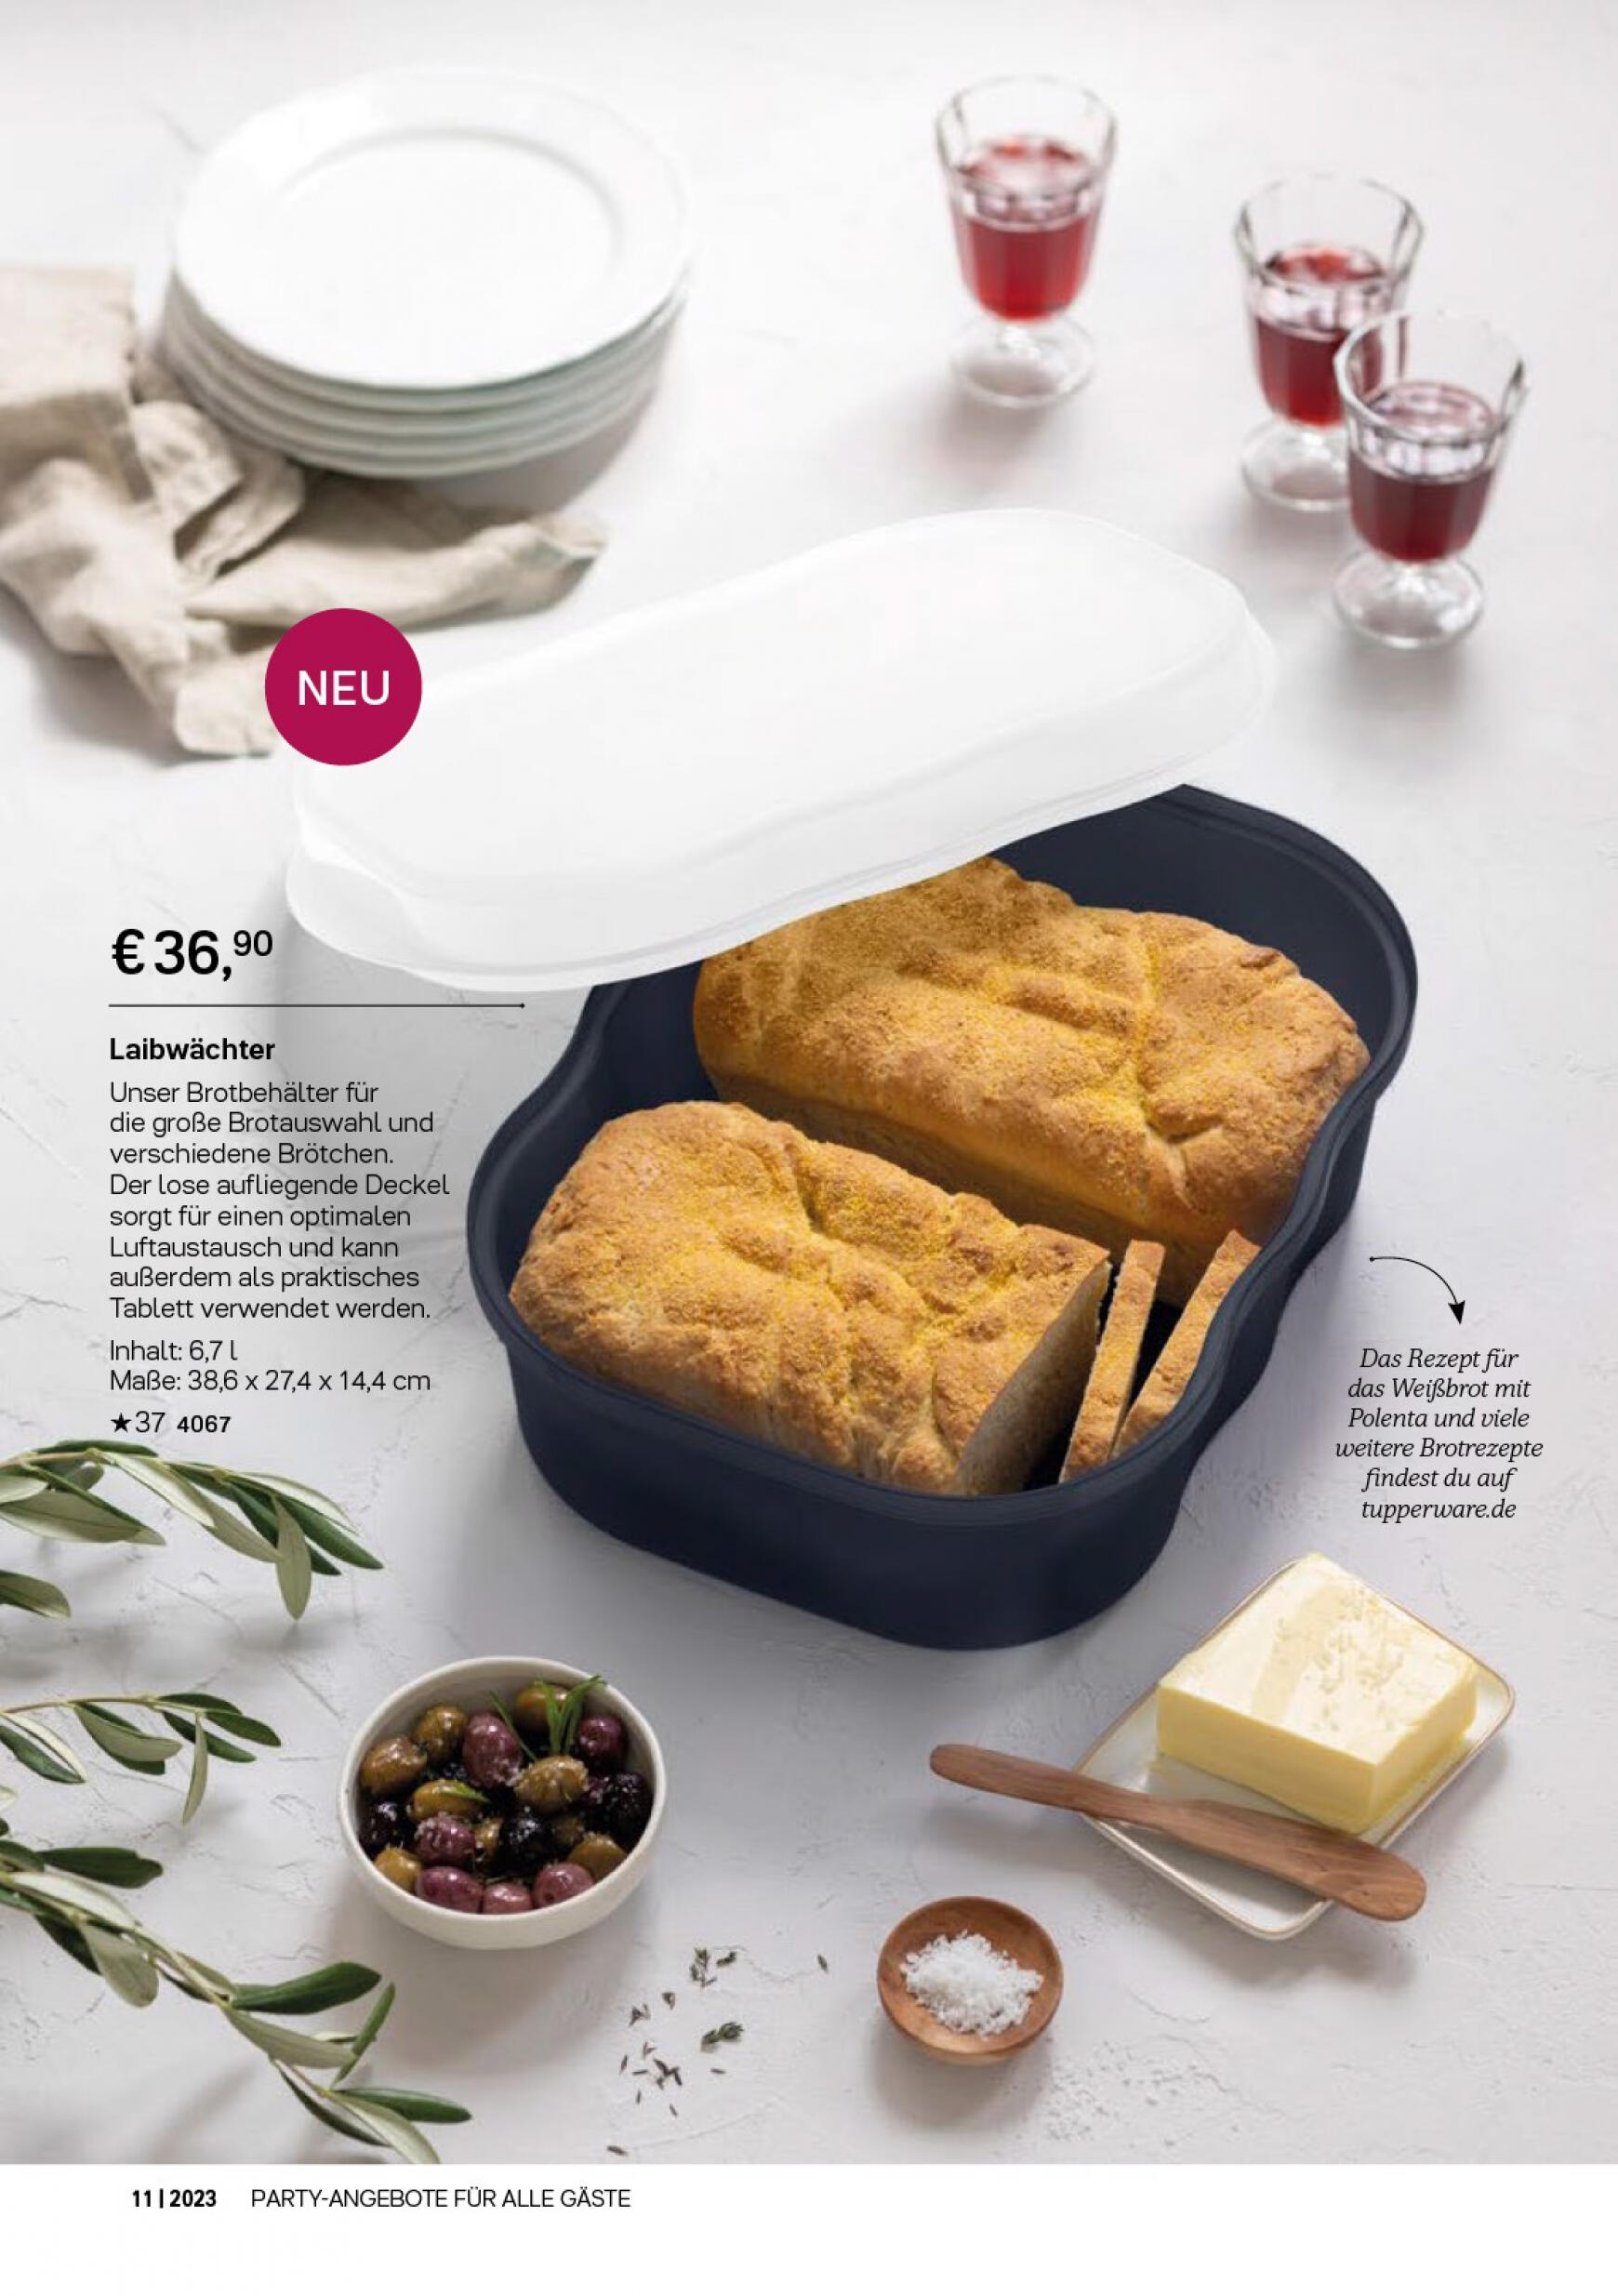 tupperware - Tupperware Online & Party - page: 4